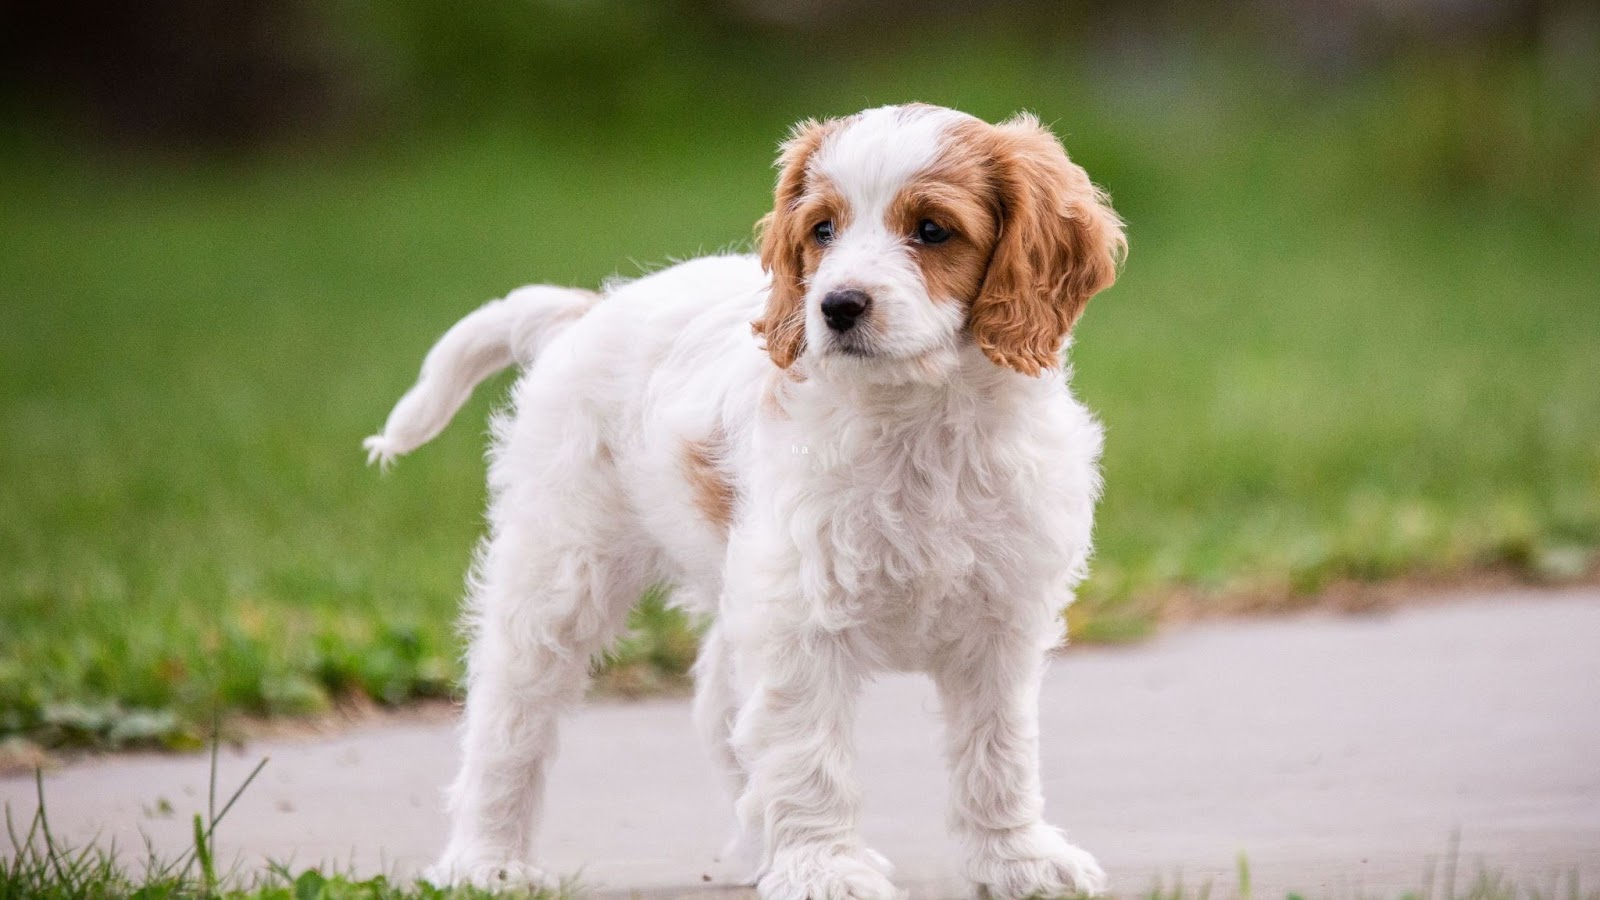 cavachon puppy with red ears standing pavement and grass